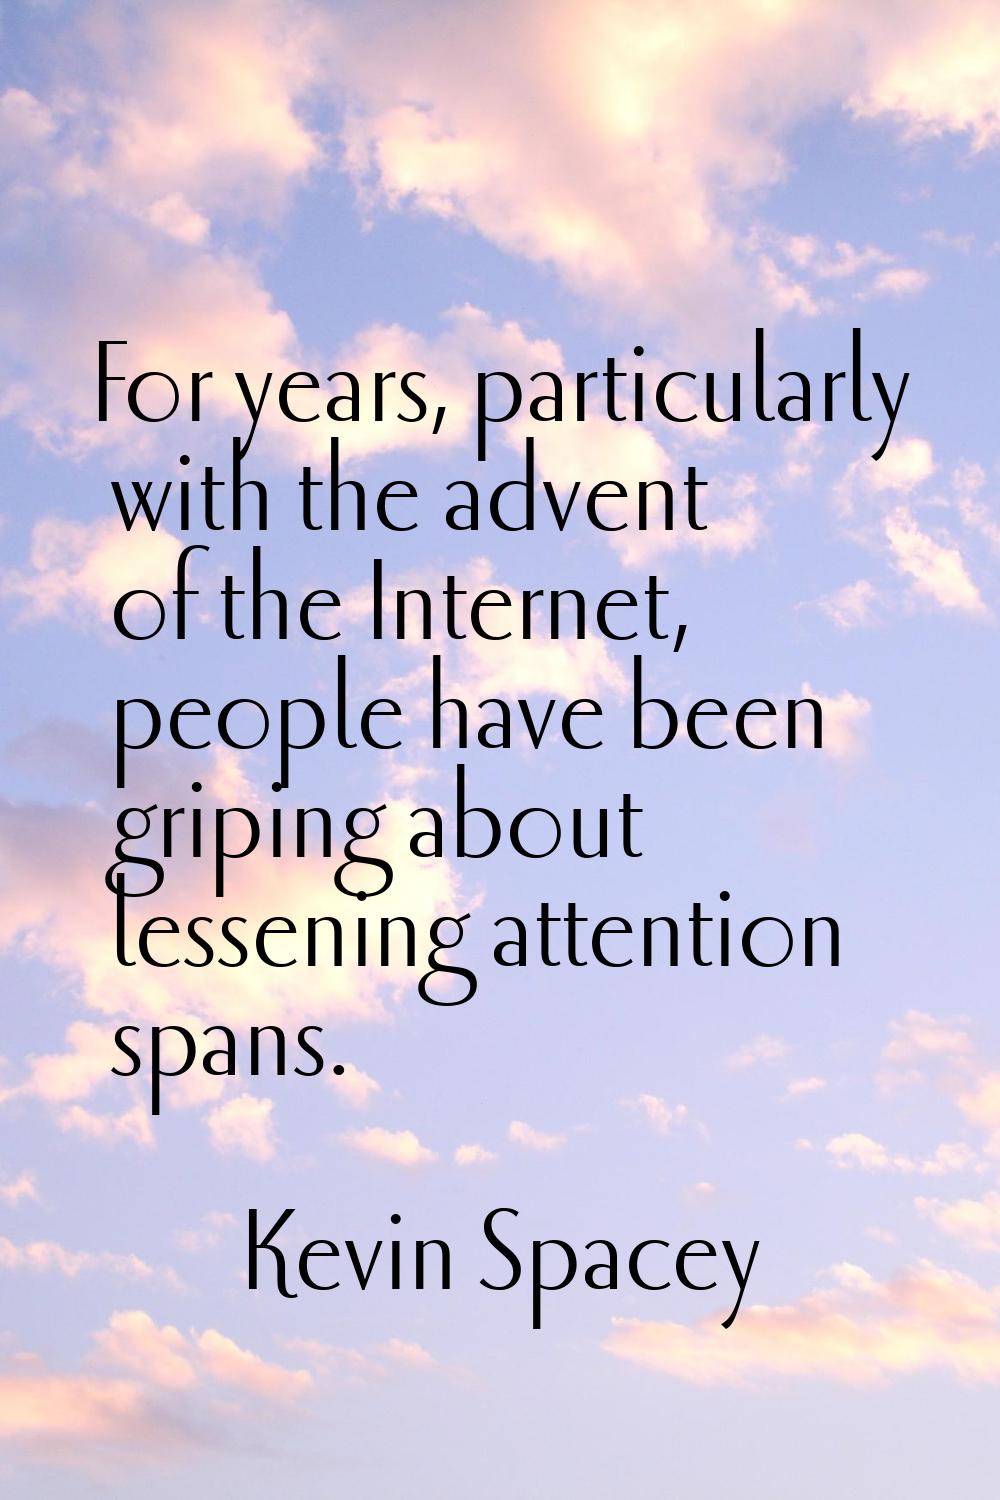 For years, particularly with the advent of the Internet, people have been griping about lessening a